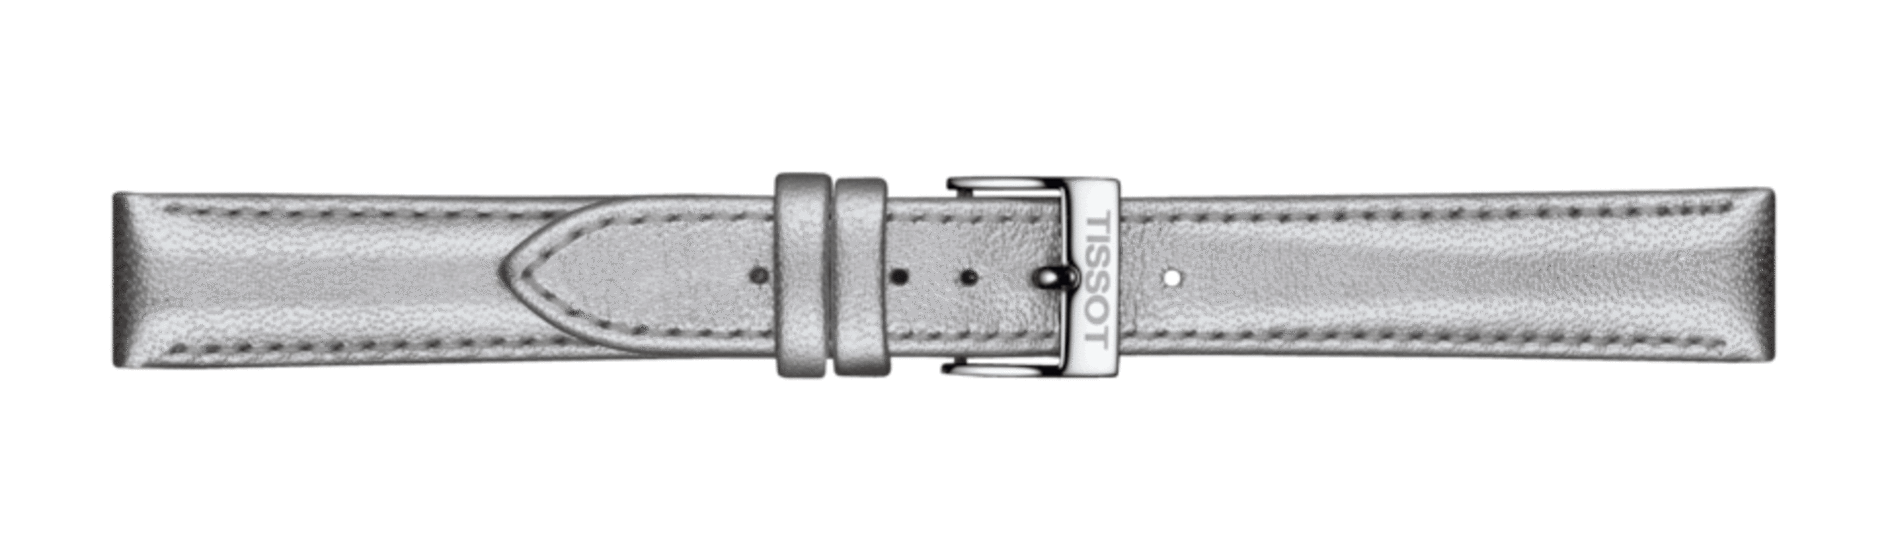 TISSOT OFFICIAL GREY LEATHER STRAP LUGS 16 MM T852.047.129